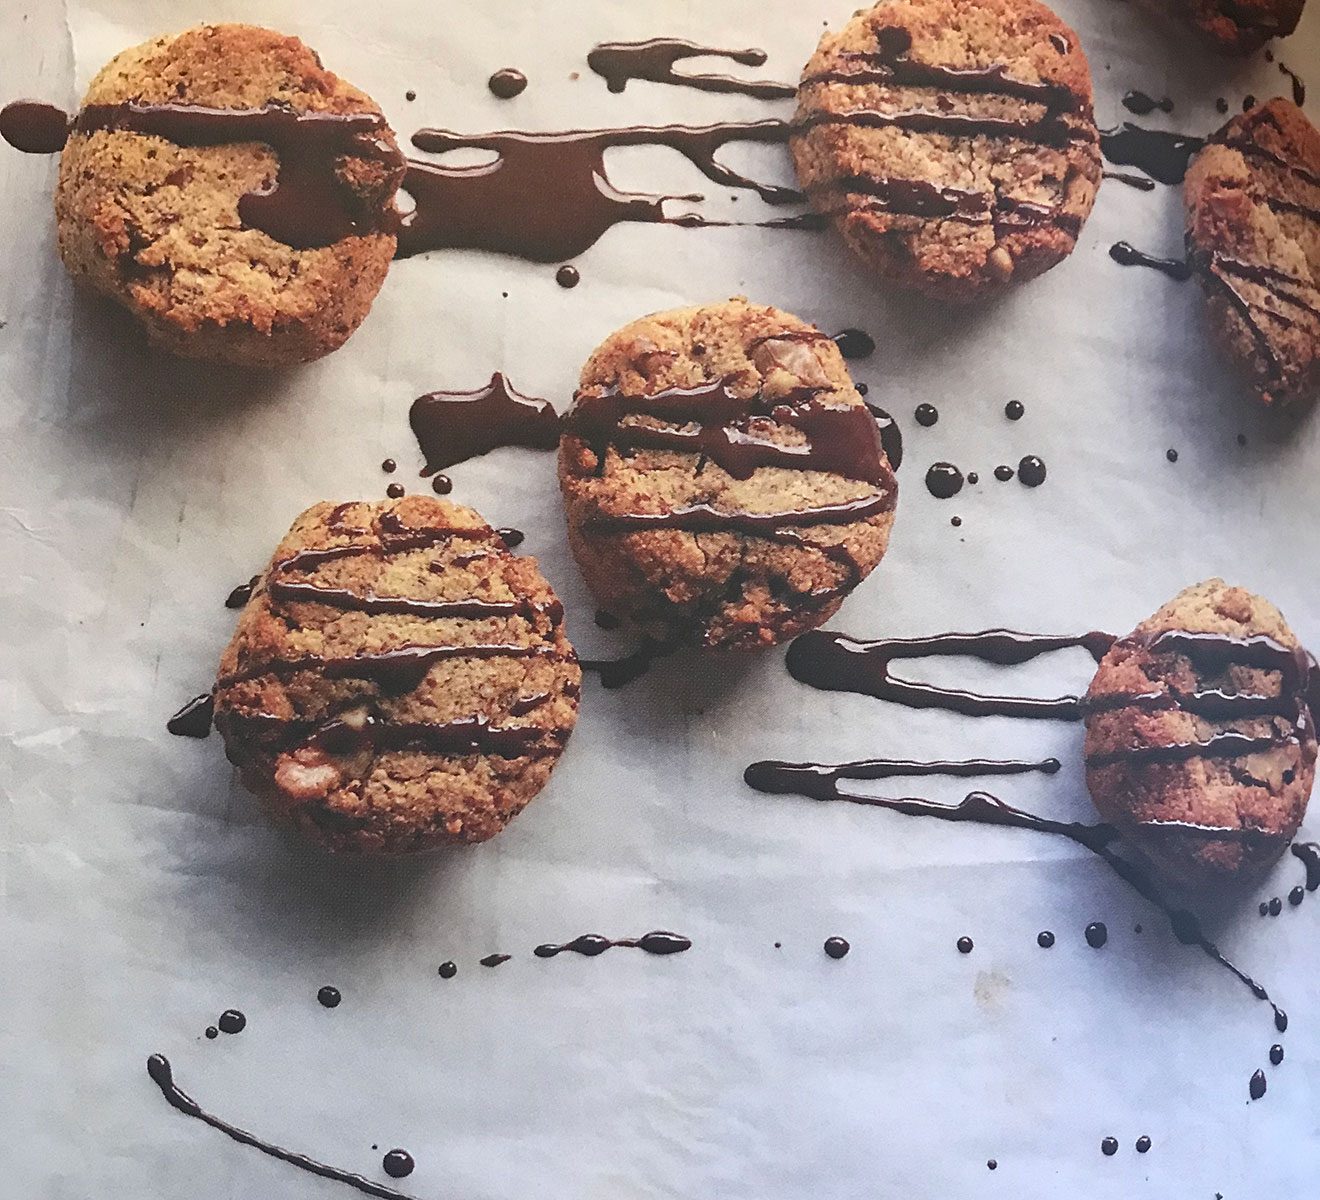 Learn how to rid belly fat using these delicious nut biscuits